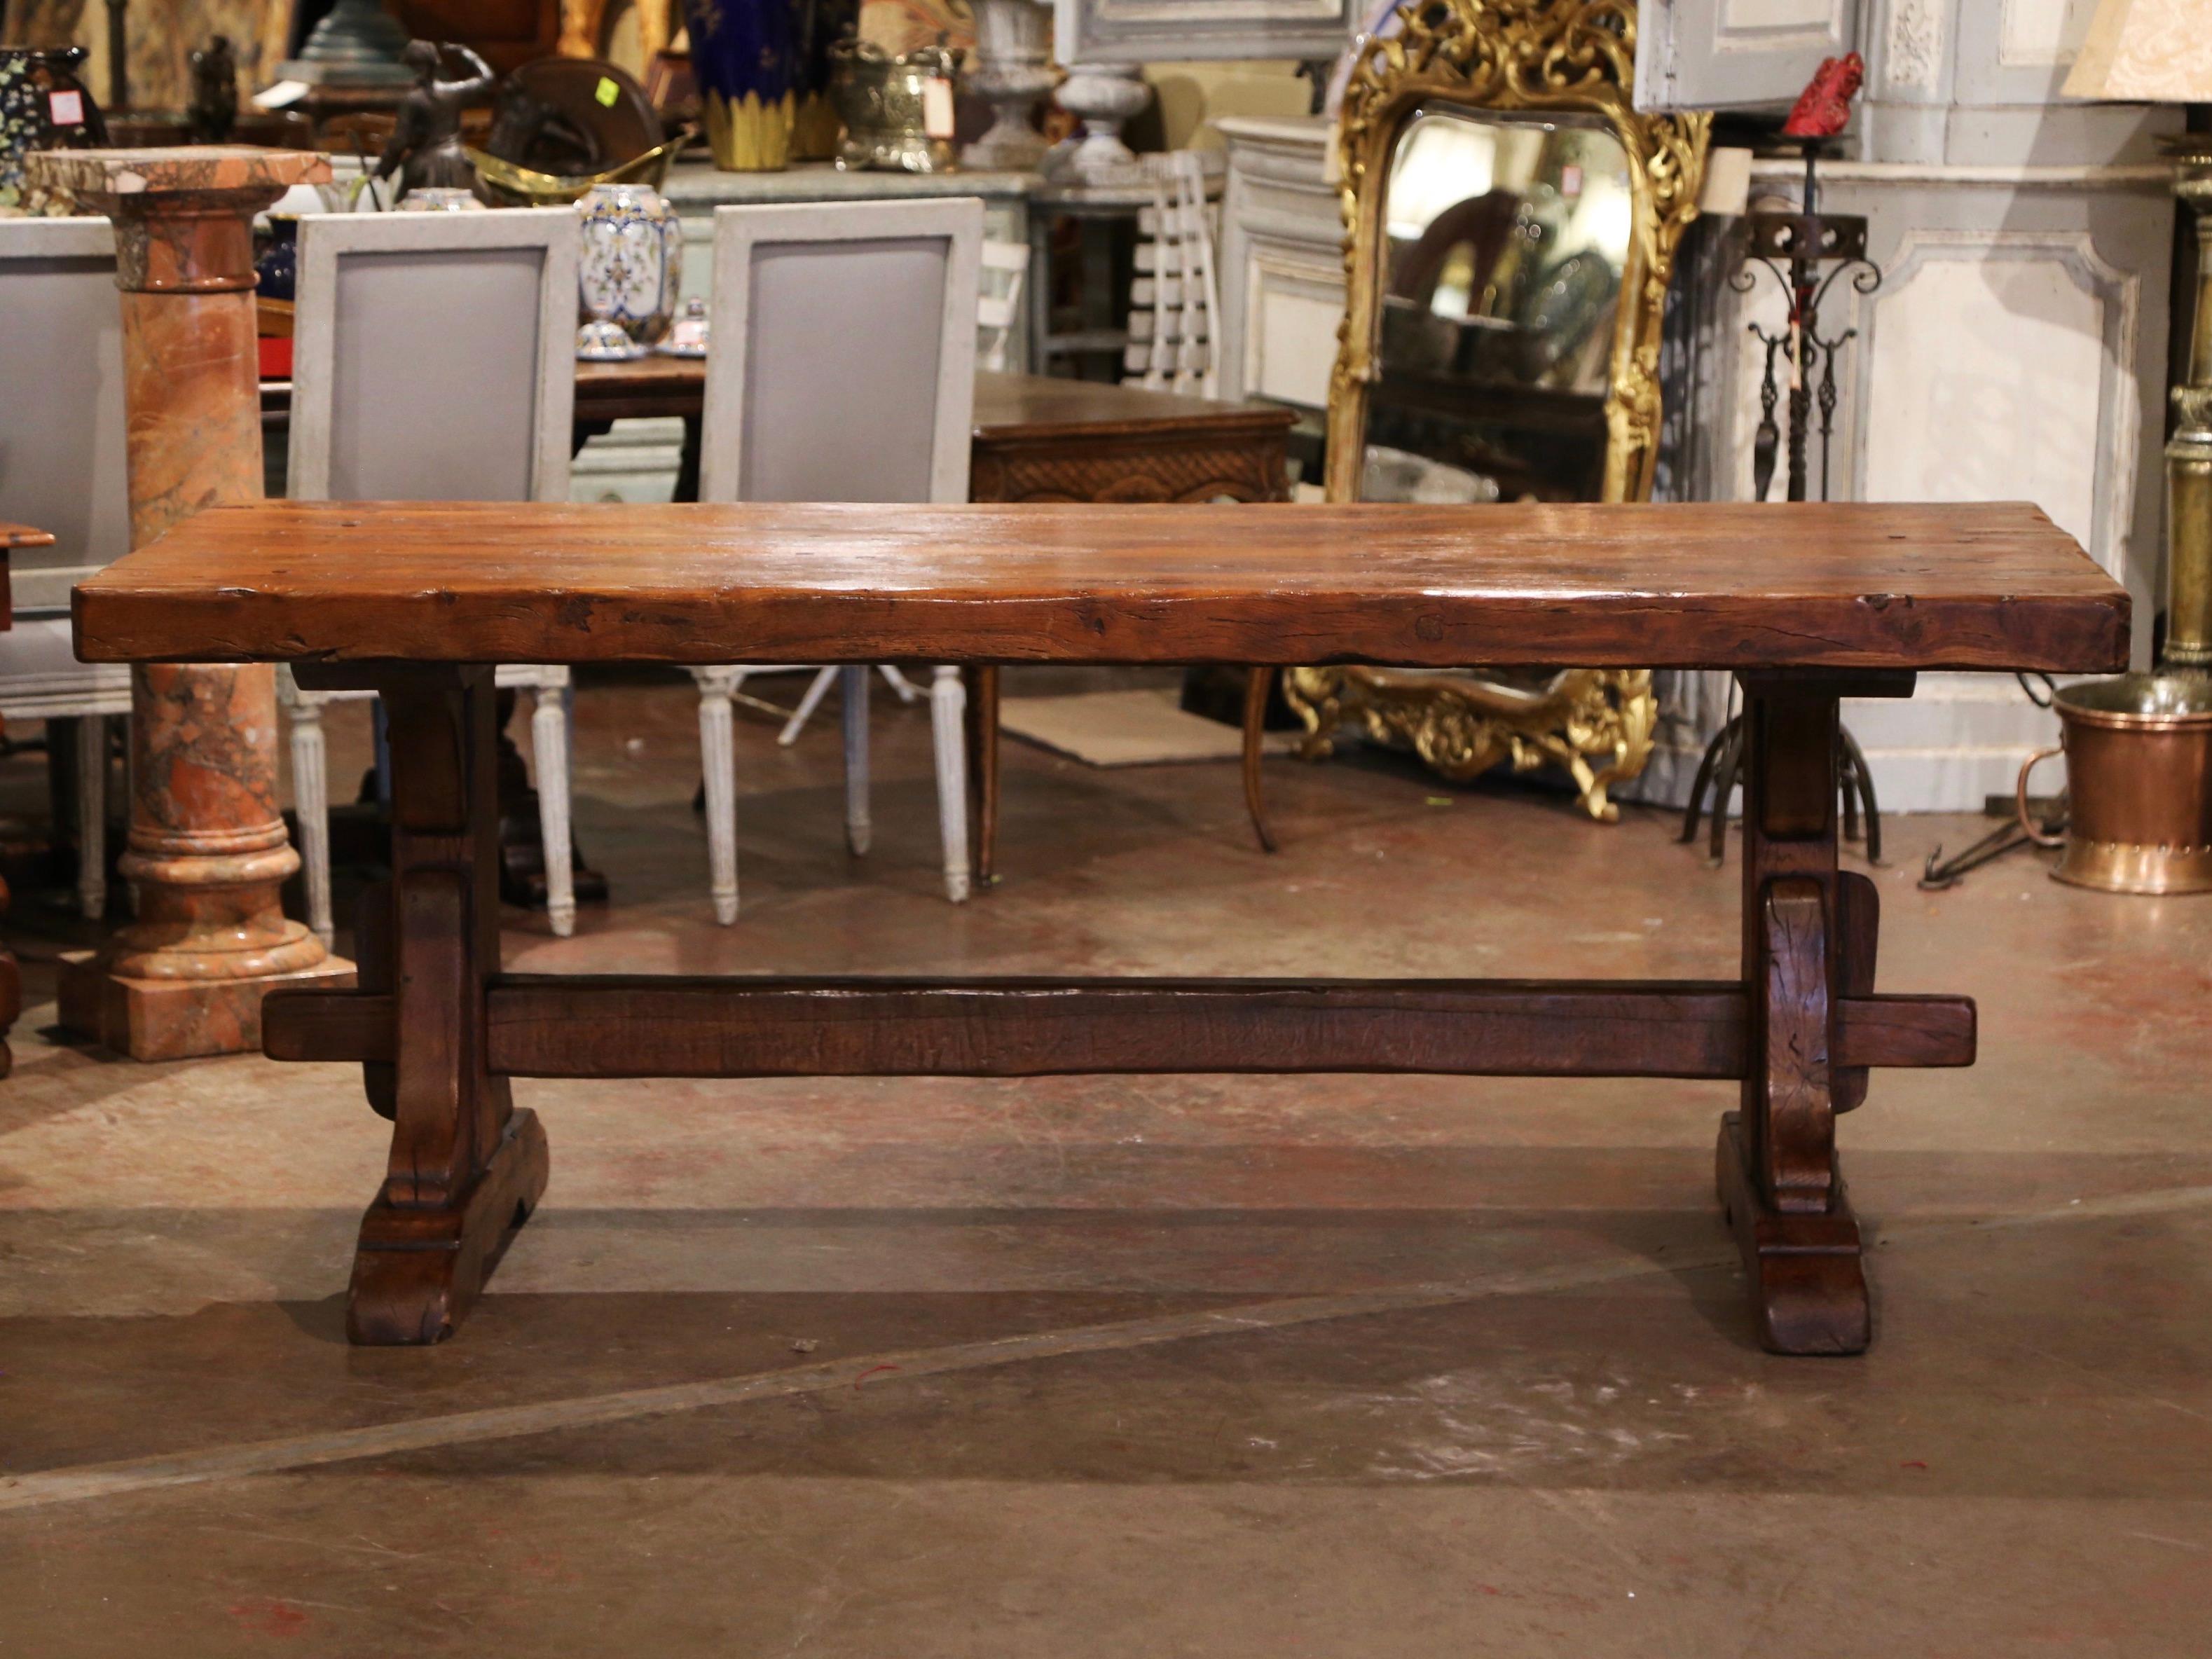 This elegant antique dining table was found in a monastery in Normandy. Crafted in France circa 1780 and built of solid oak, the table stands on two carved legs ending with shoe base, and joined by bottom stretcher attached with key and tenon. The